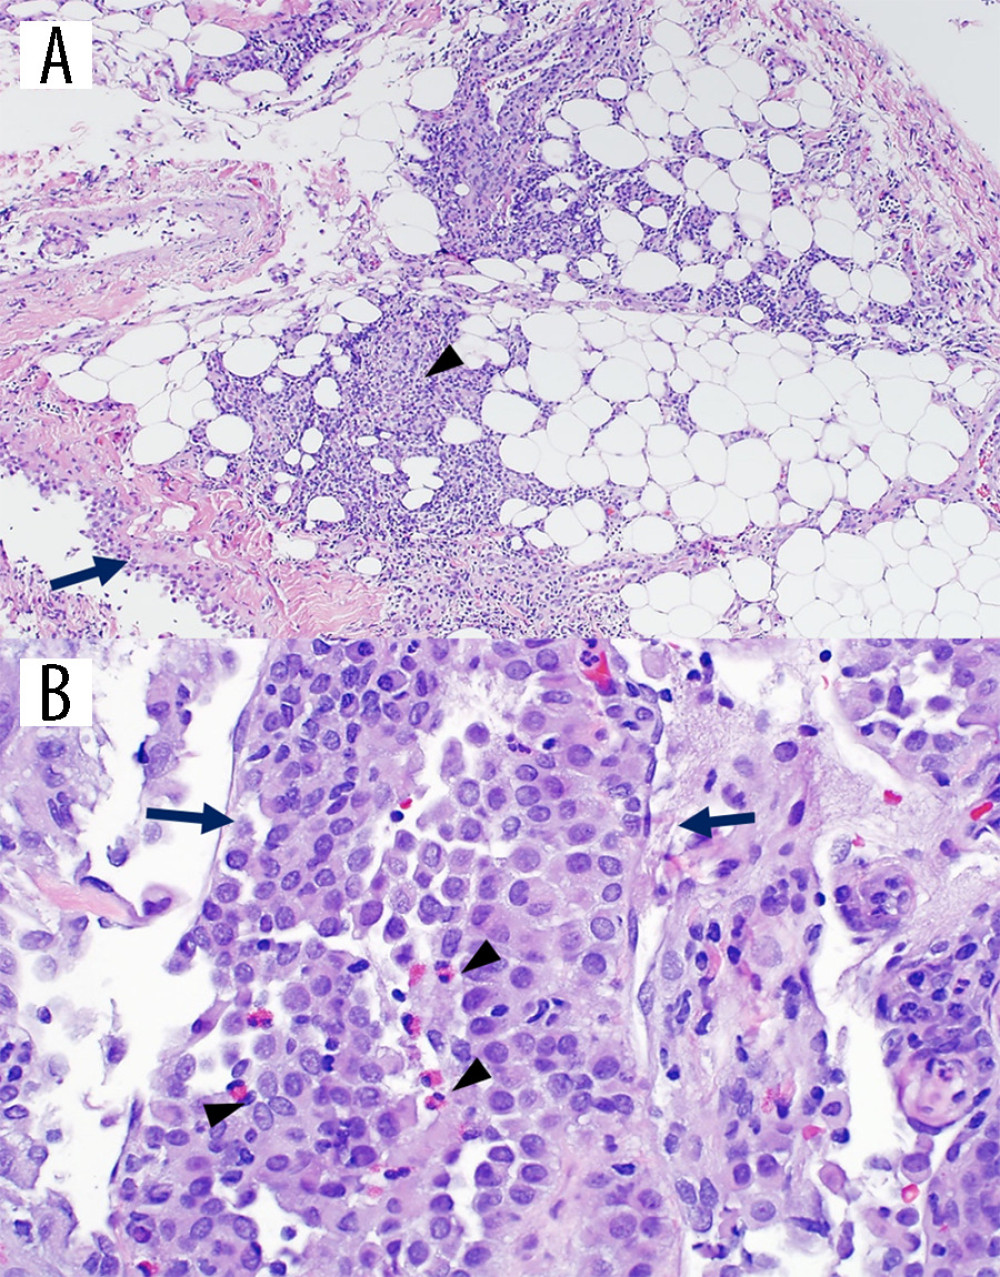 (A) H&E stain of parietal pleural biopsy showing lymphoid infiltration (arrowhead) and reactive mesothelial hyperplasia (arrow) consistent with chronic pleuritis (100×). (B) H&E stain of parietal pleural biopsy showing mesothelial hyperplasia (arrows) with eosinophilic infiltrate (arrowheads) (400×).